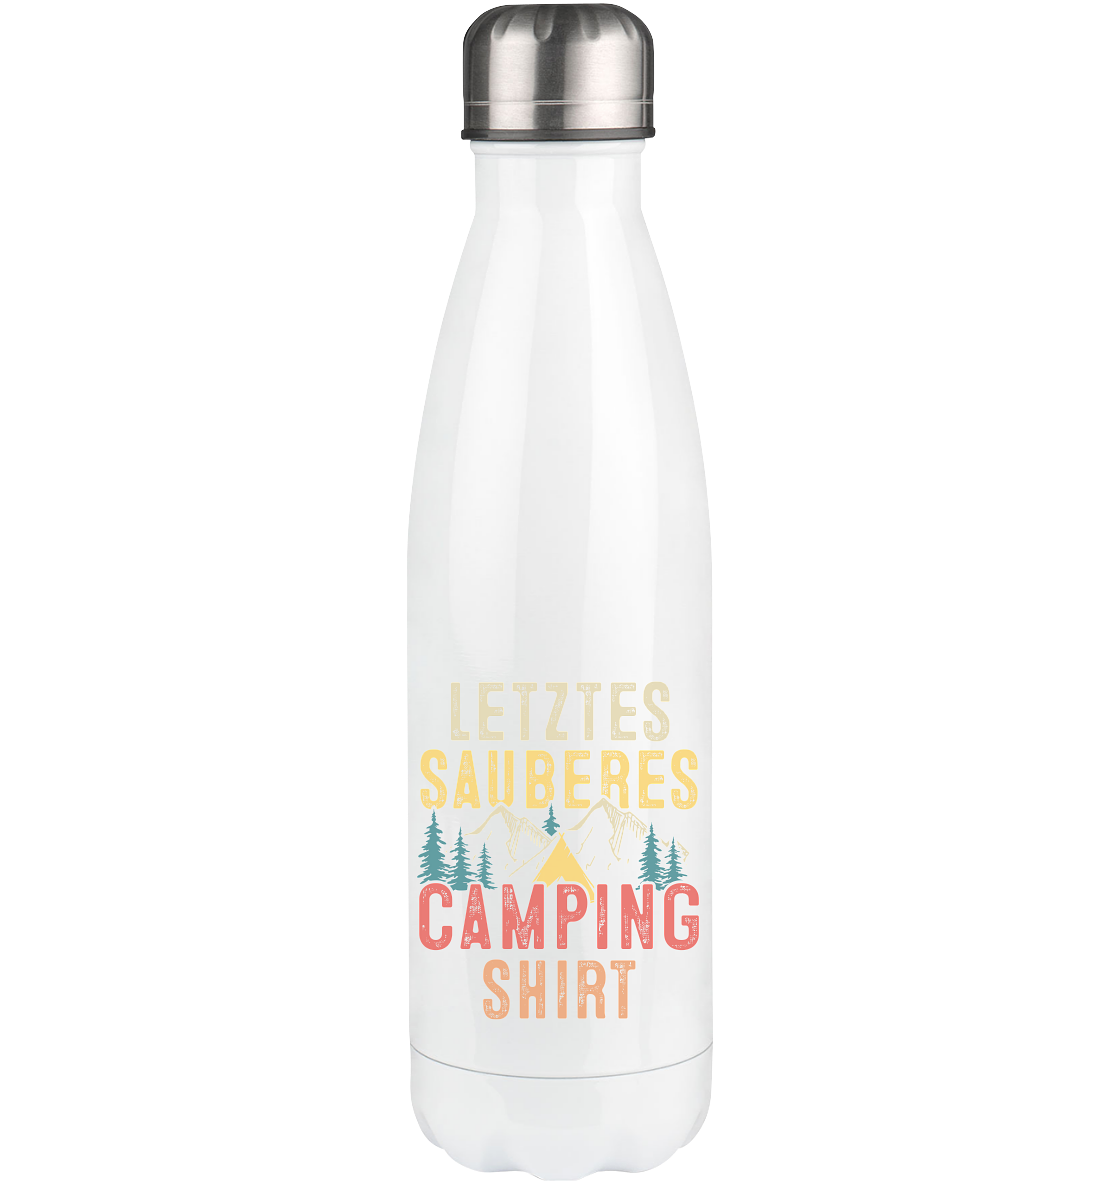 Letztes Sauberes Camping Shirt - Edelstahl Thermosflasche camping 500ml